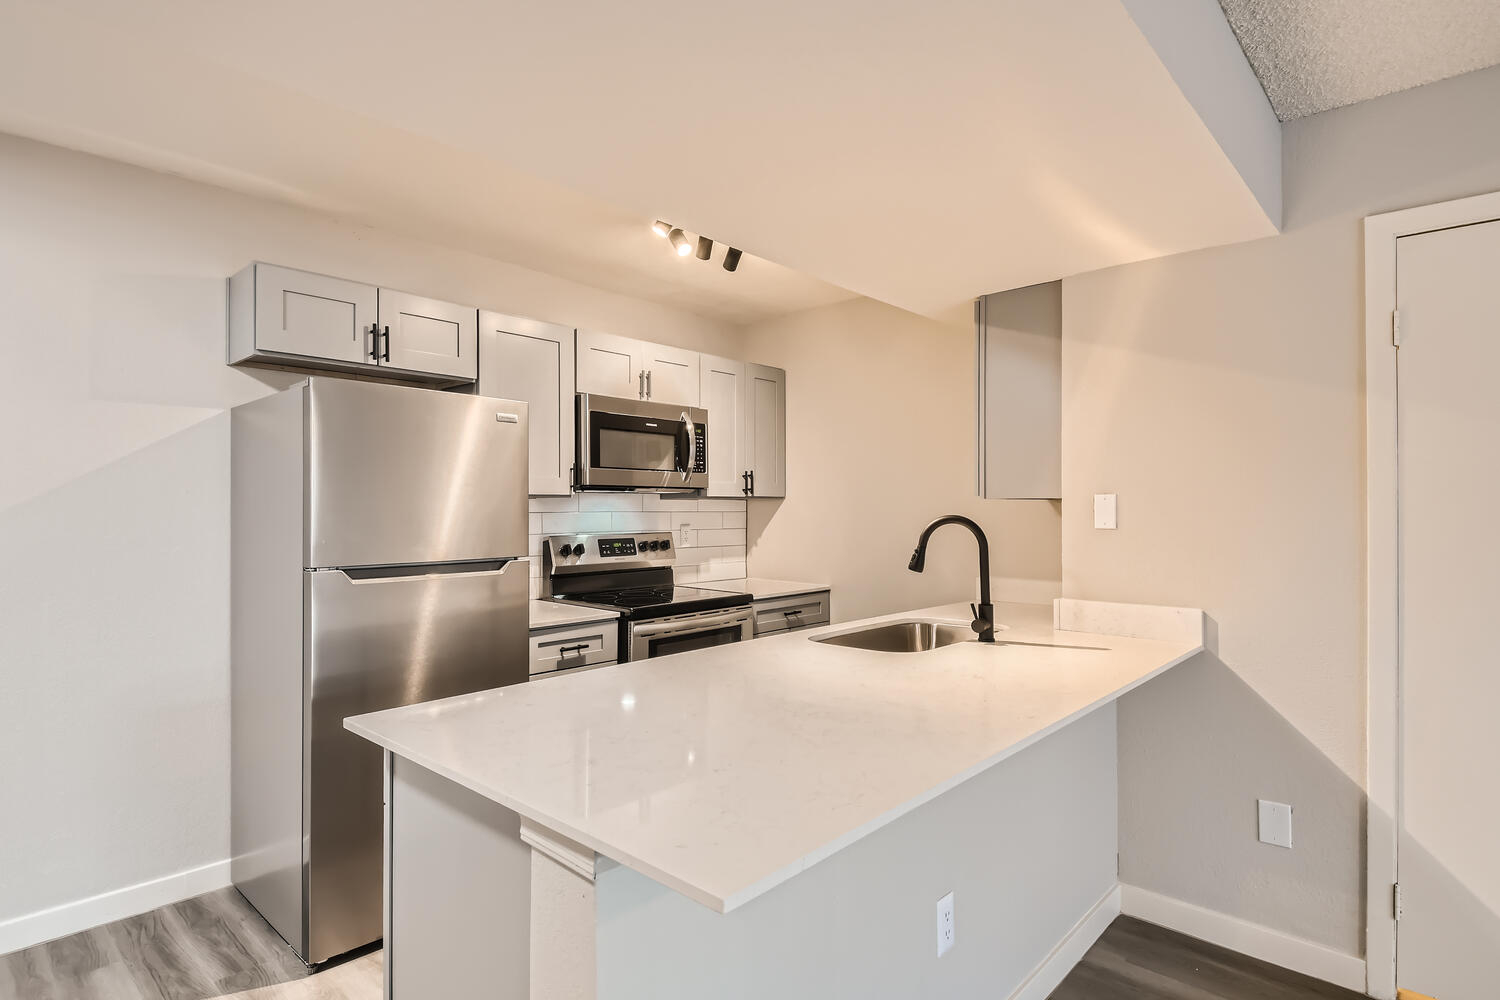 The kitchen in an apartment at Rise on McClintock with quartz countertops, white shaker cabinets, and stainless steel appliance.